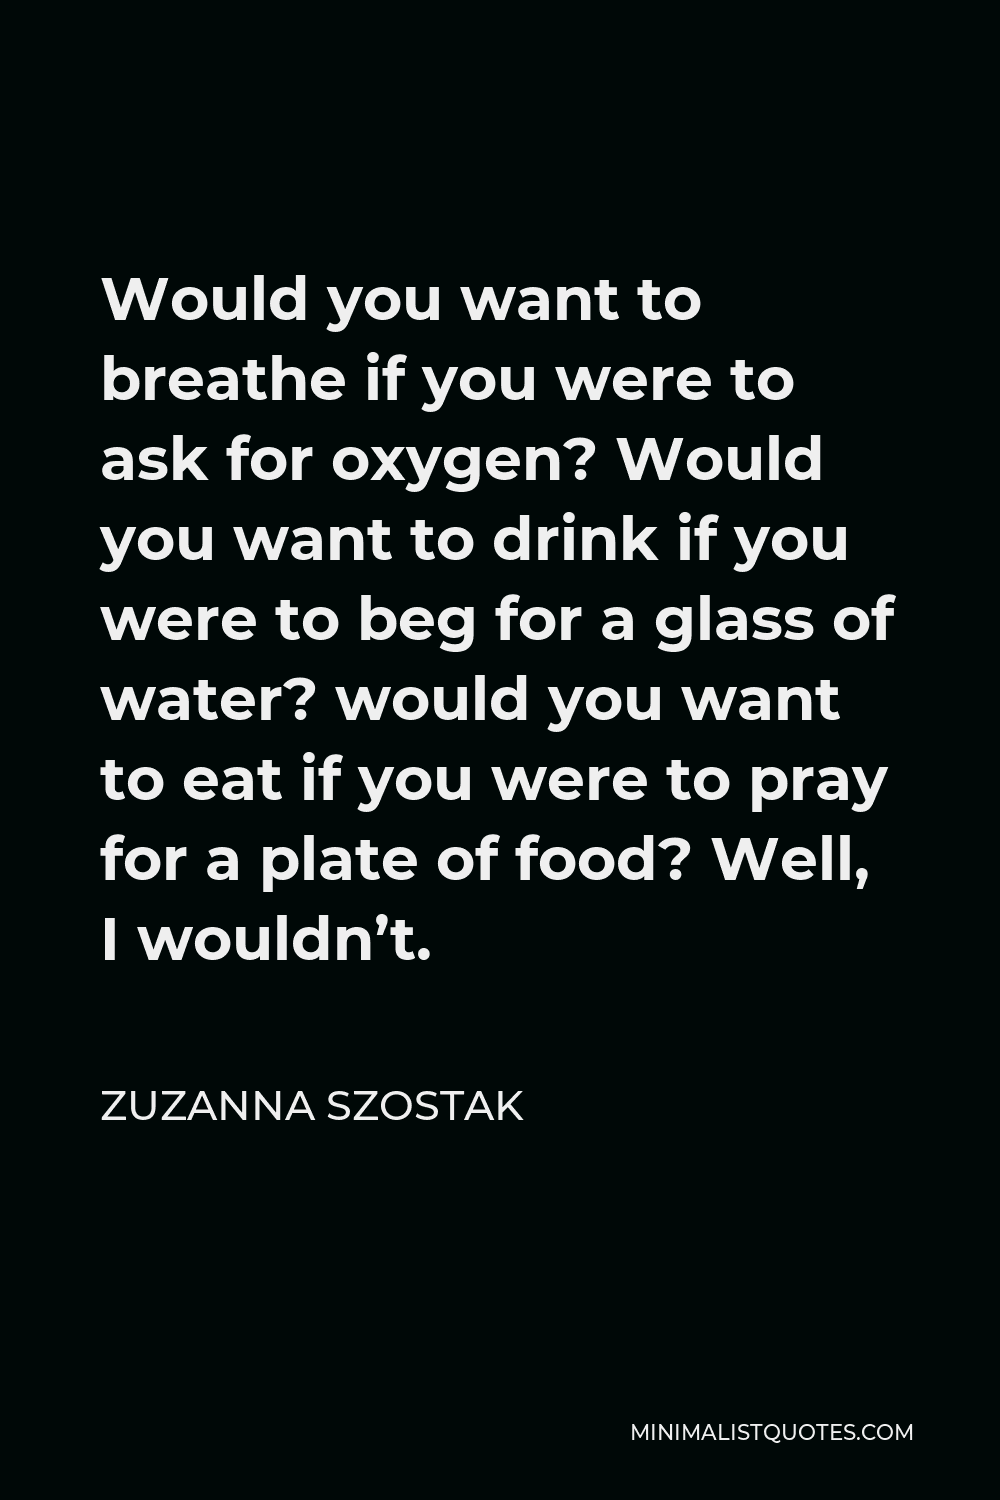 Zuzanna Szostak Quote - Would you want to breathe if you were to ask for oxygen? Would you want to drink if you were to beg for a glass of water? would you want to eat if you were to pray for a plate of food? Well, I wouldn’t.